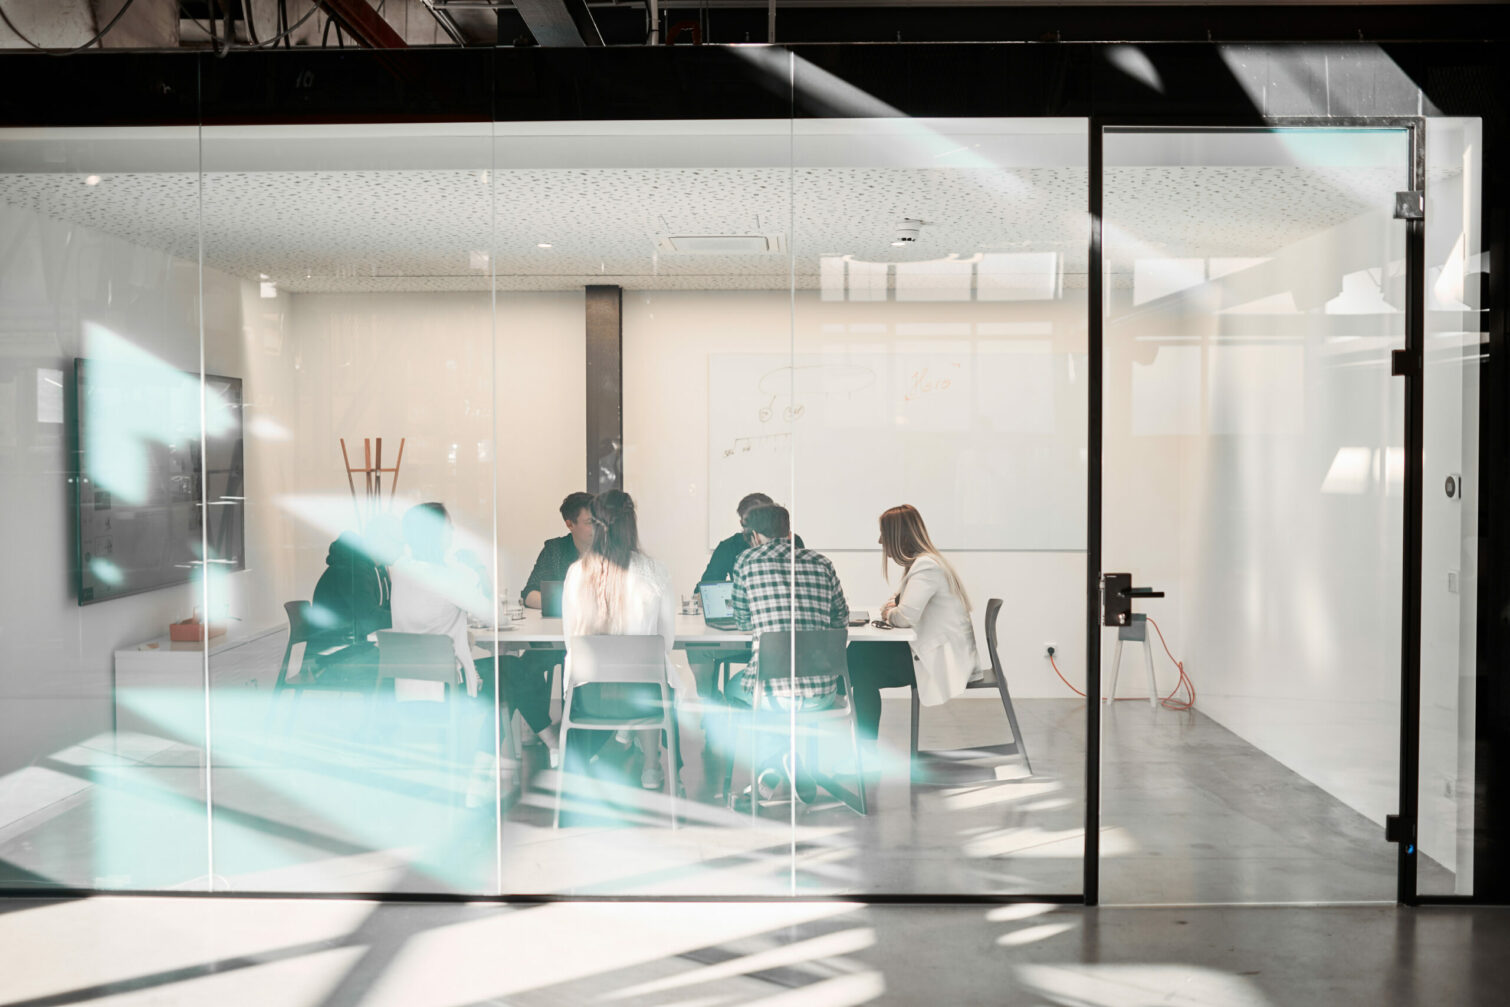 Photo of a group holding a meeting in a room with glass walls.